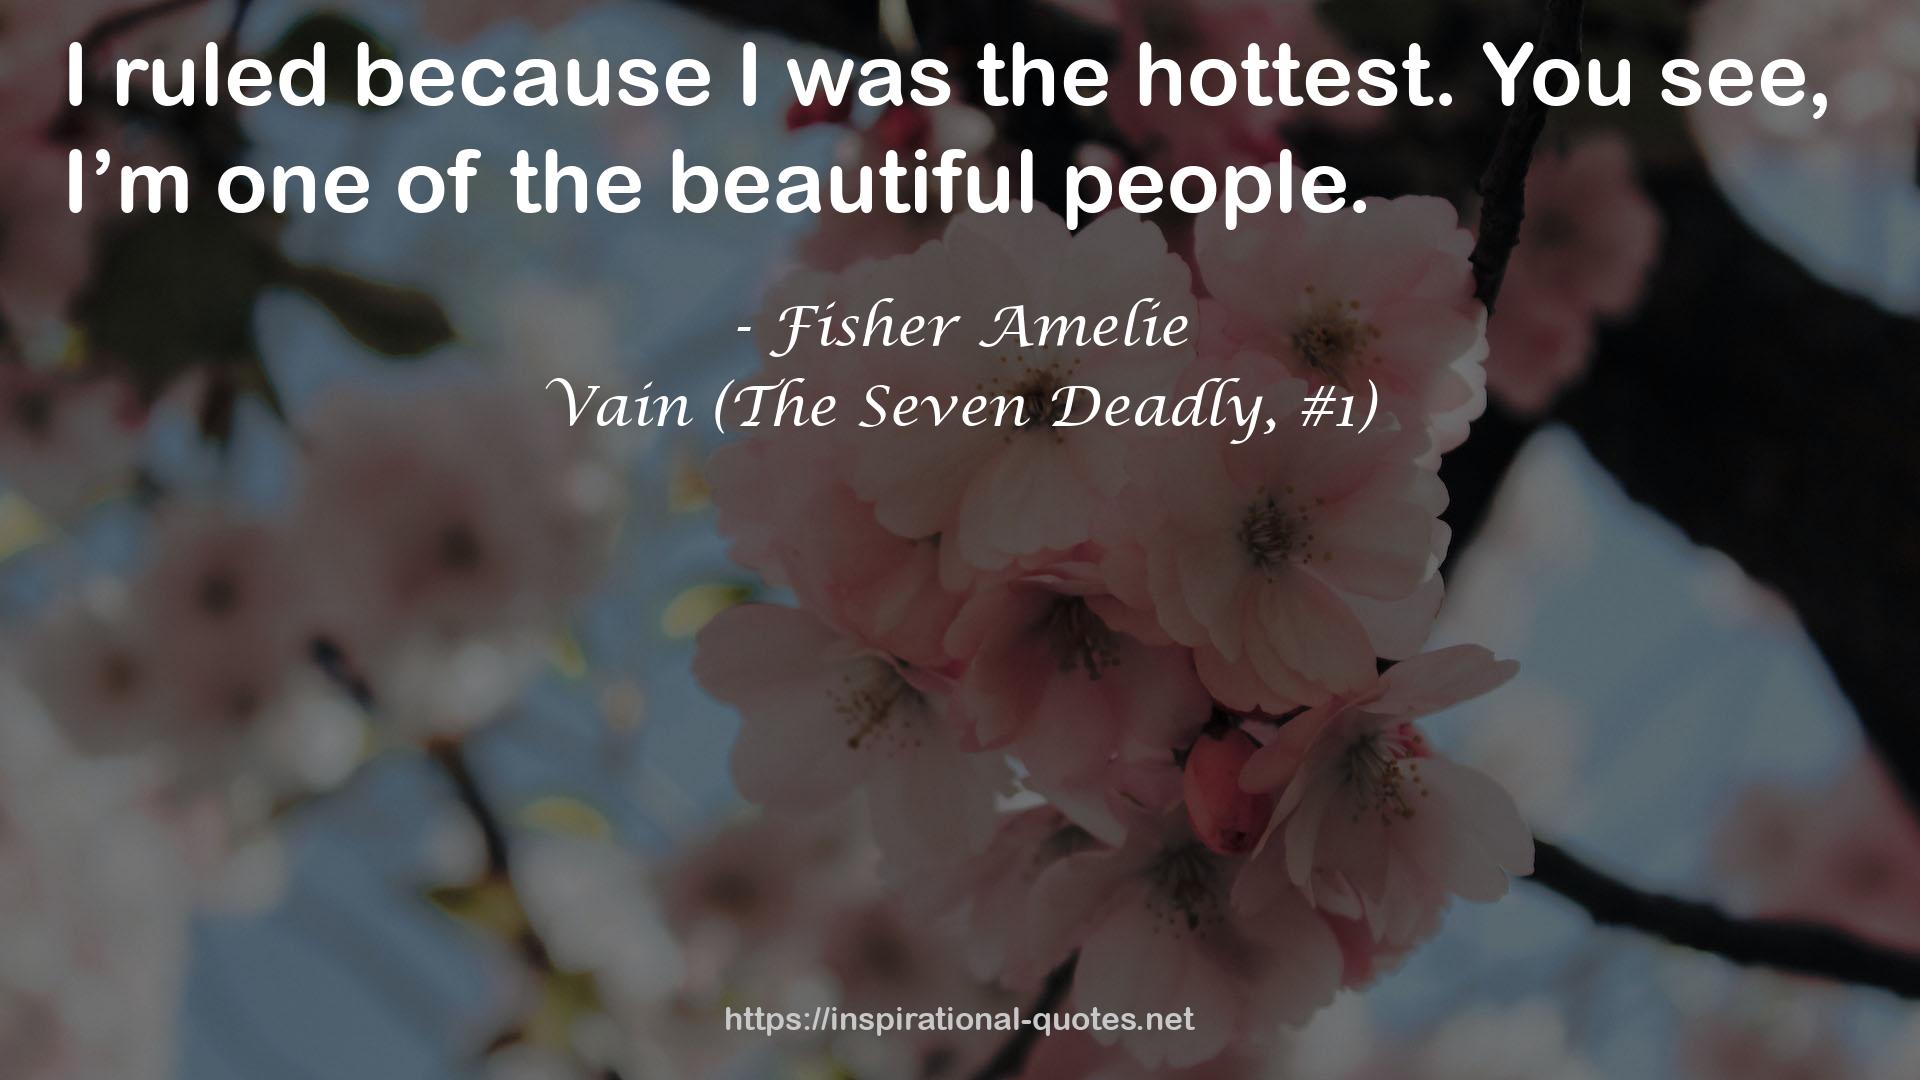 Vain (The Seven Deadly, #1) QUOTES